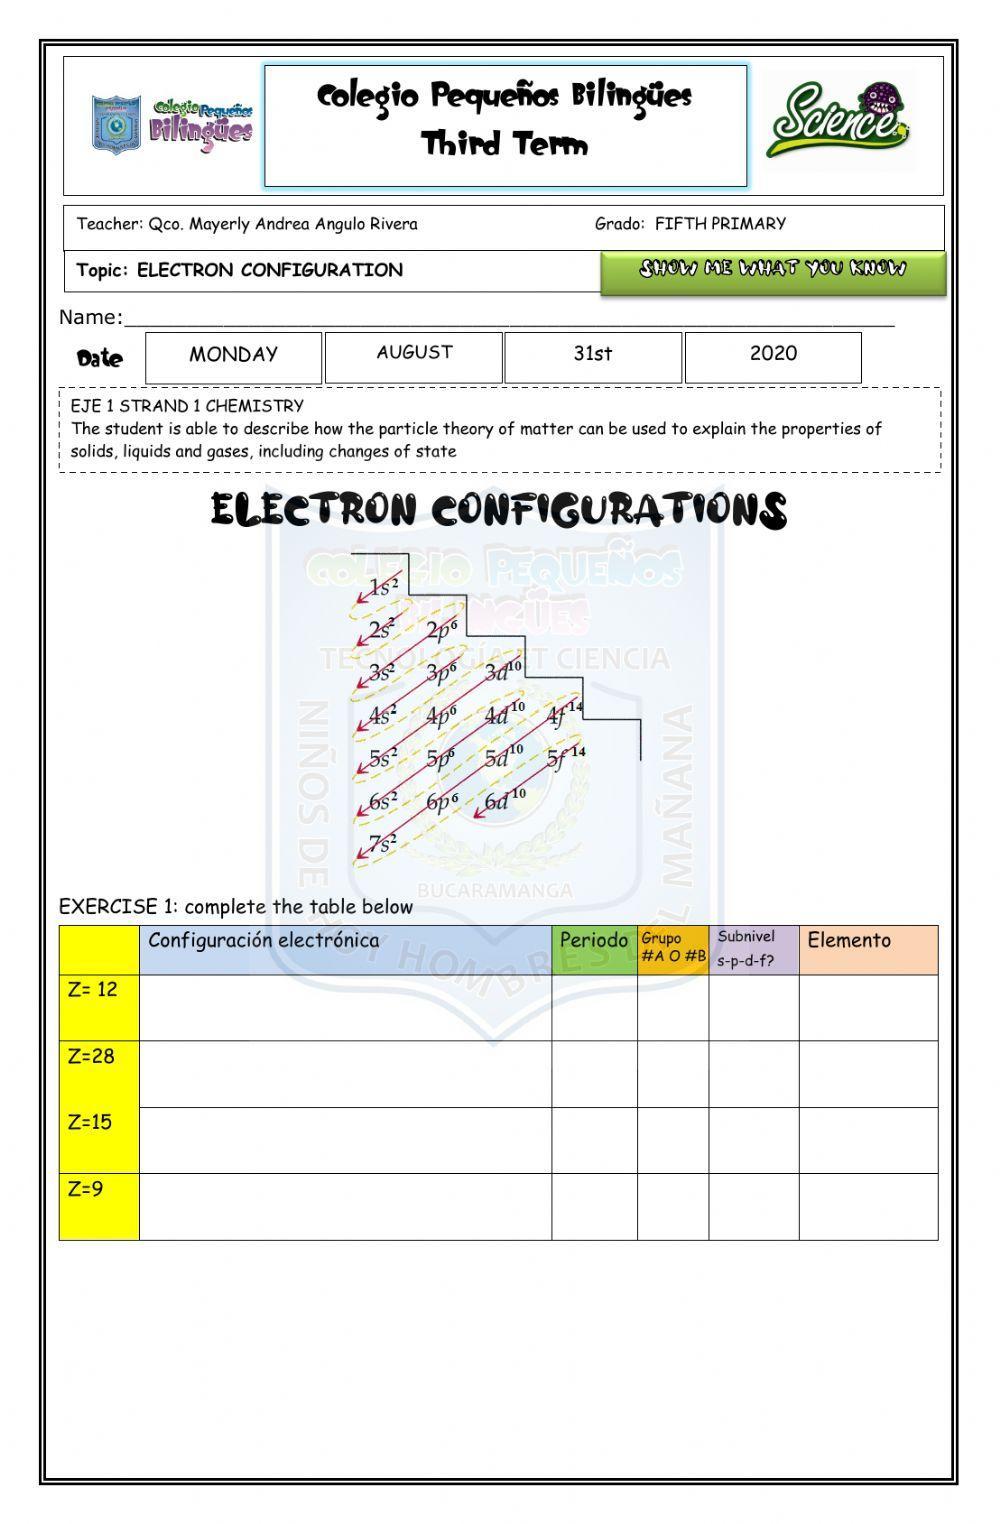 Show me what you know - electron configuration- fifth grade- third term